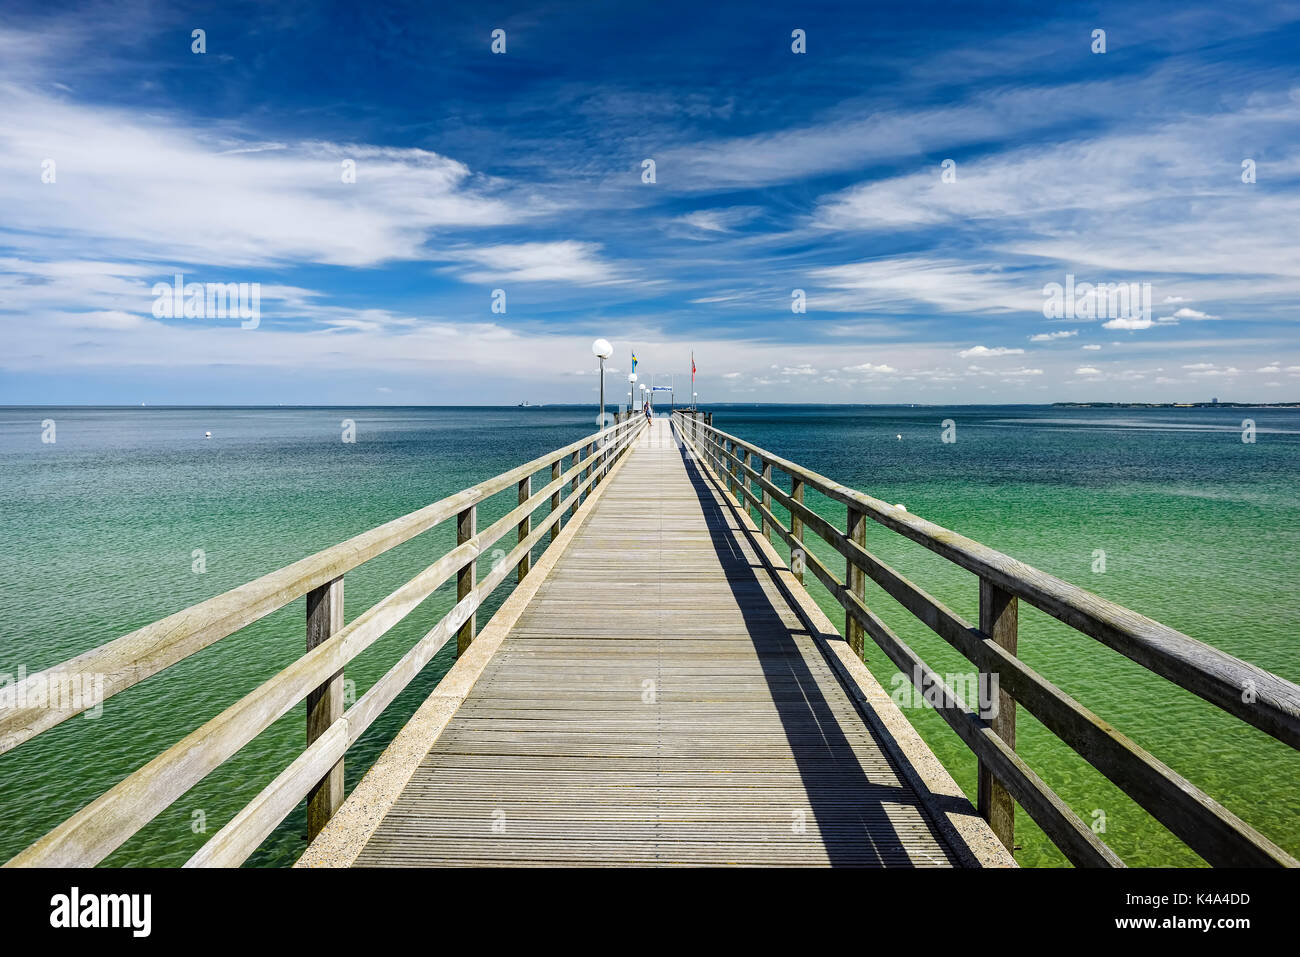 Pier And Baltic Sea In Haffkrug, Germany Stock Photo